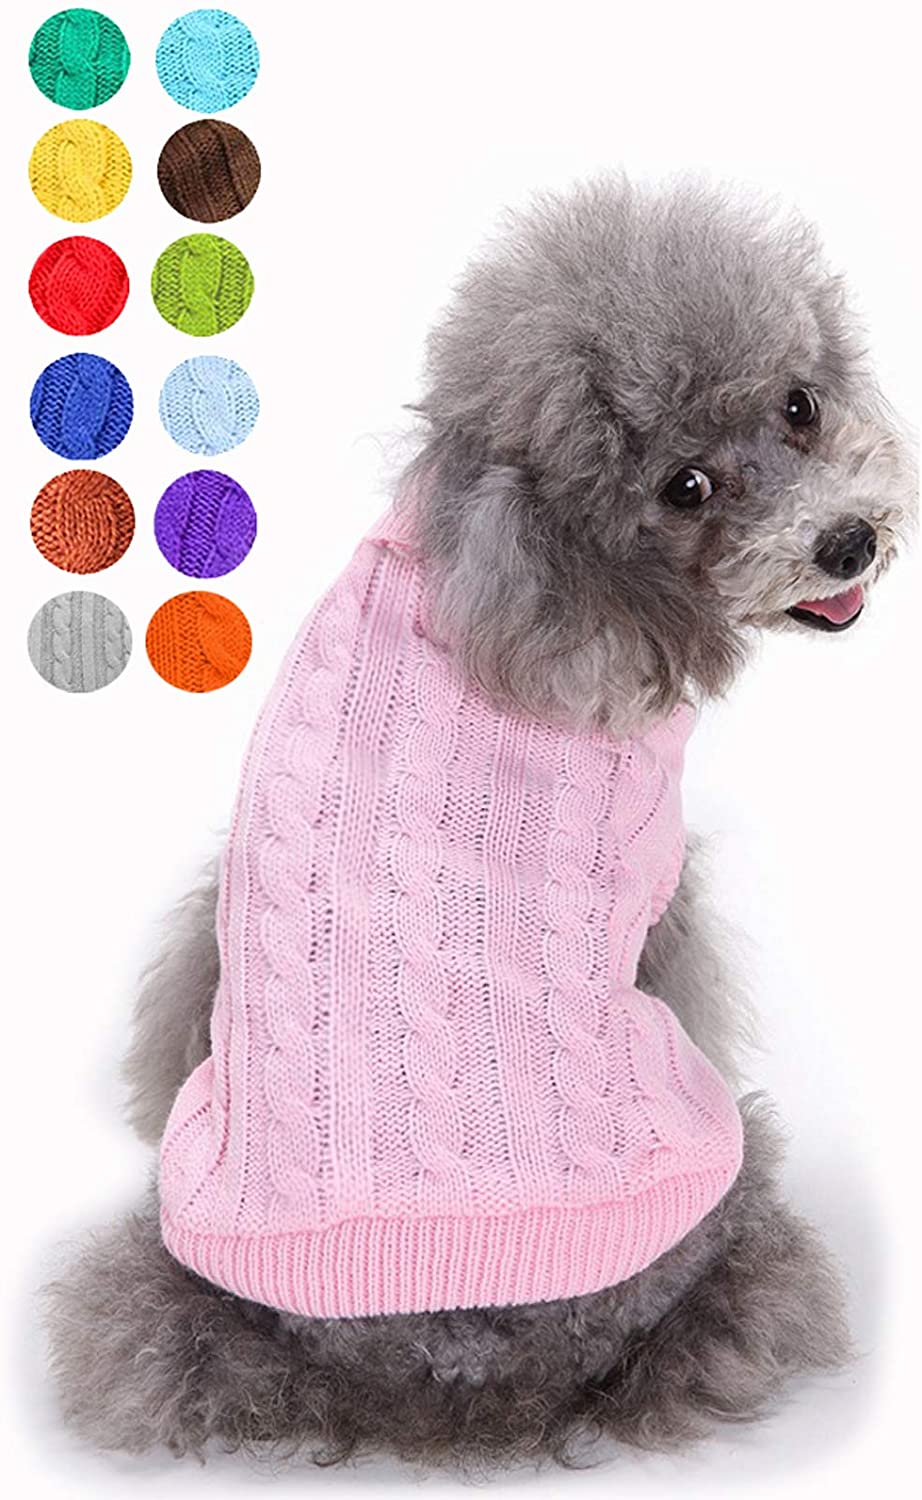 Knitted Classy Sweater for Dog & Puppy Cat